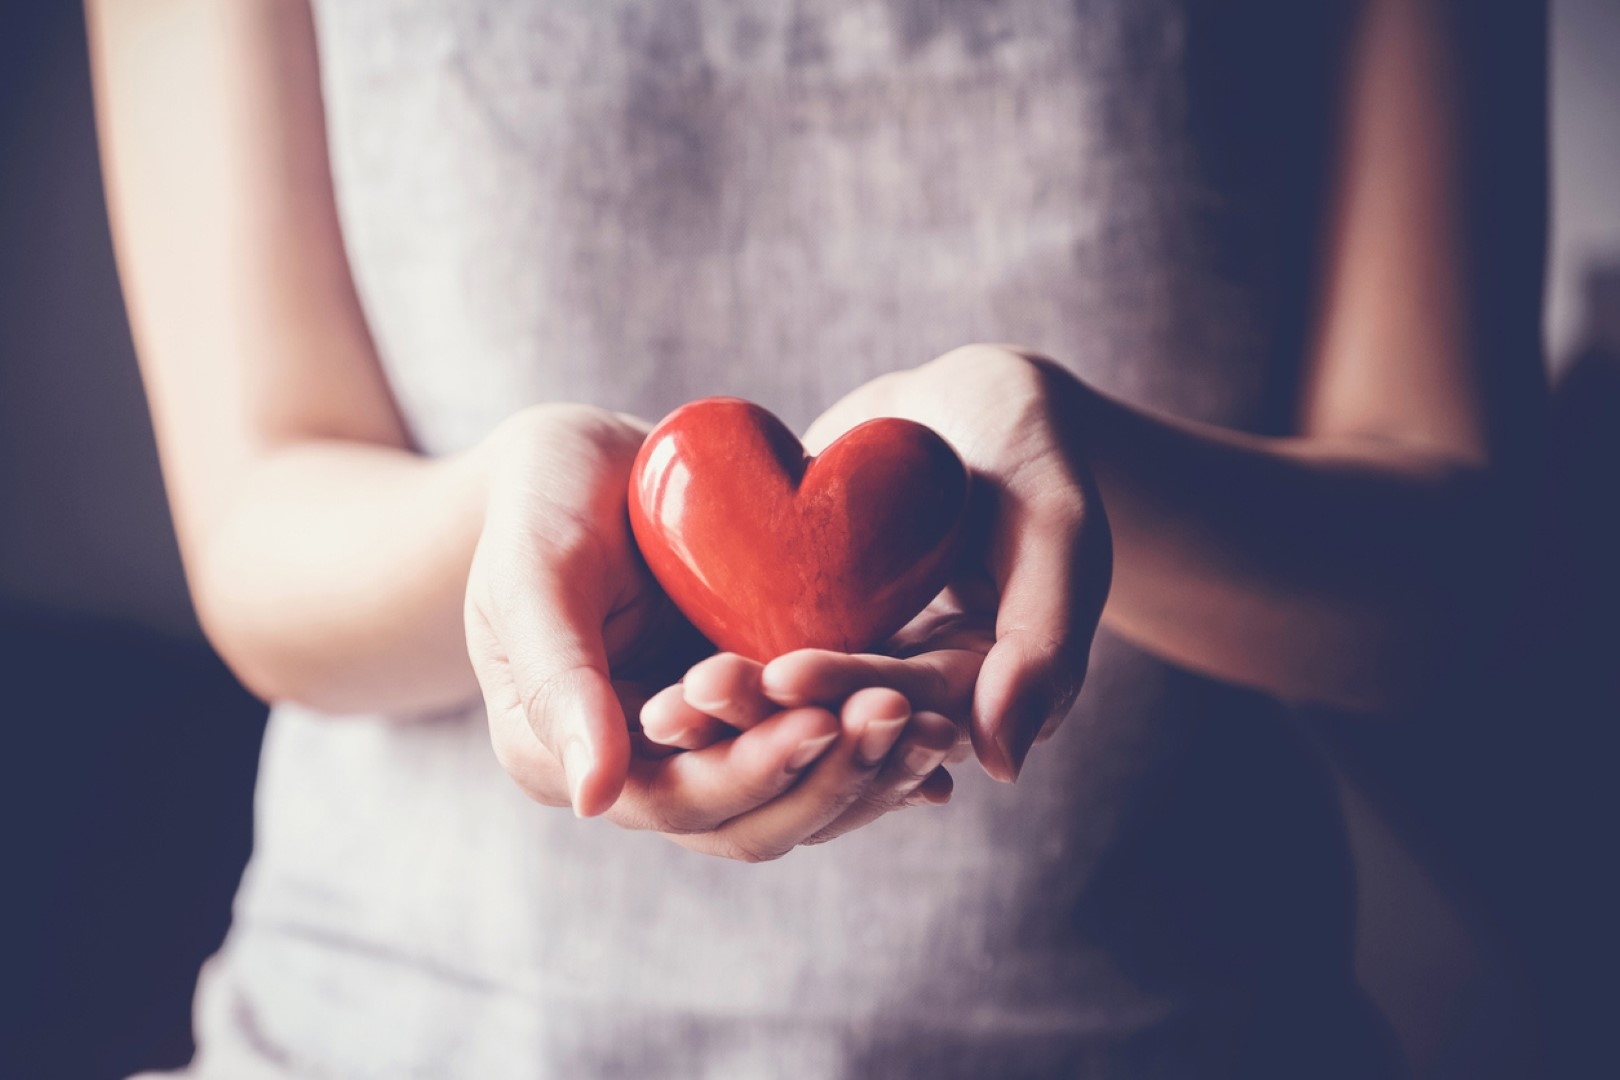 A woman delicately holds a red heart in her hands, representing affection, empathy, and kindness.